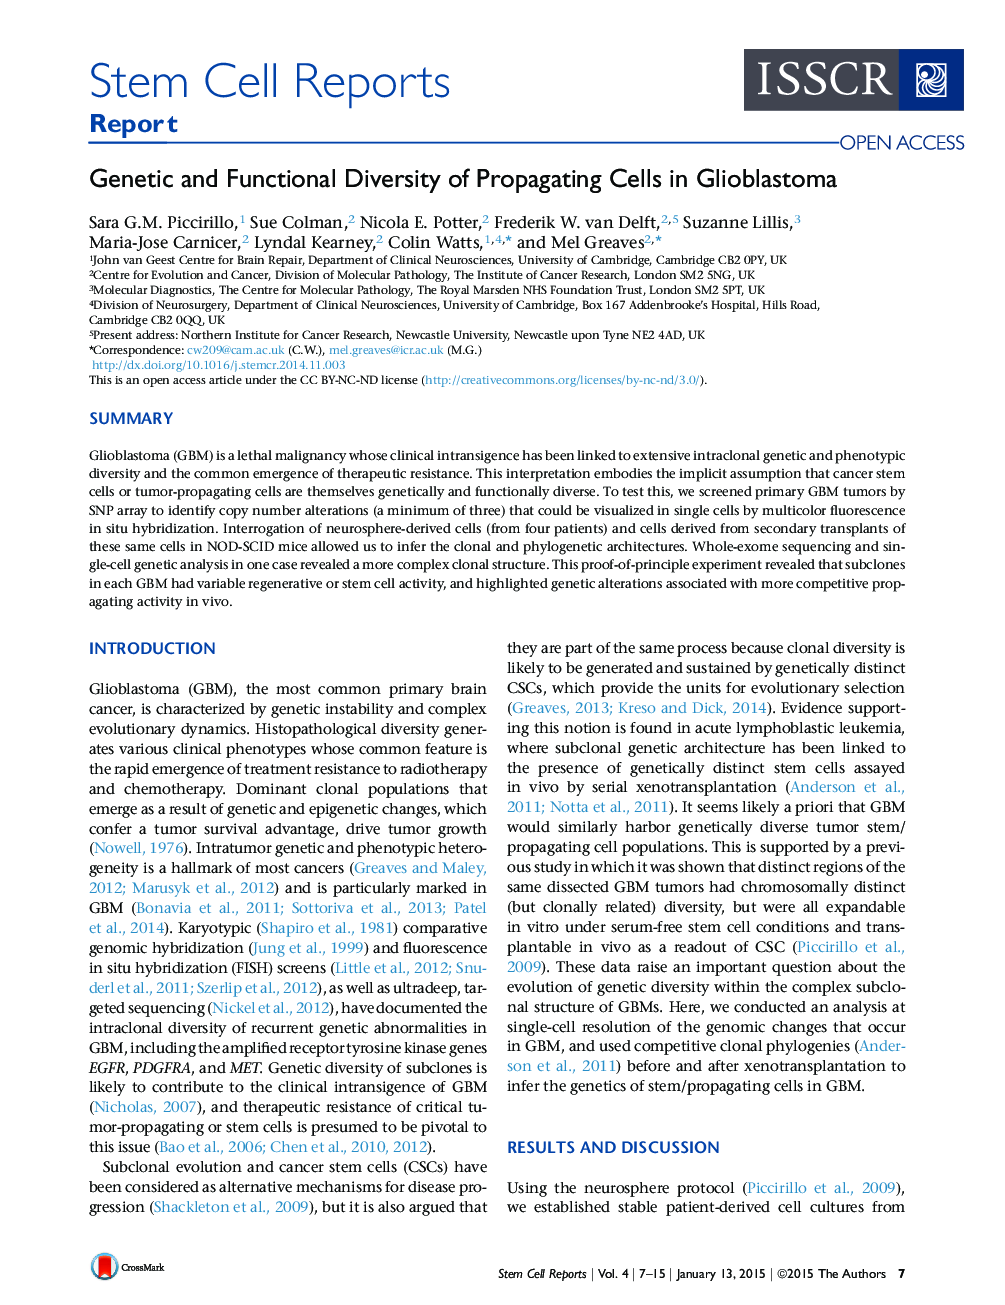 Genetic and Functional Diversity of Propagating Cells in Glioblastoma 